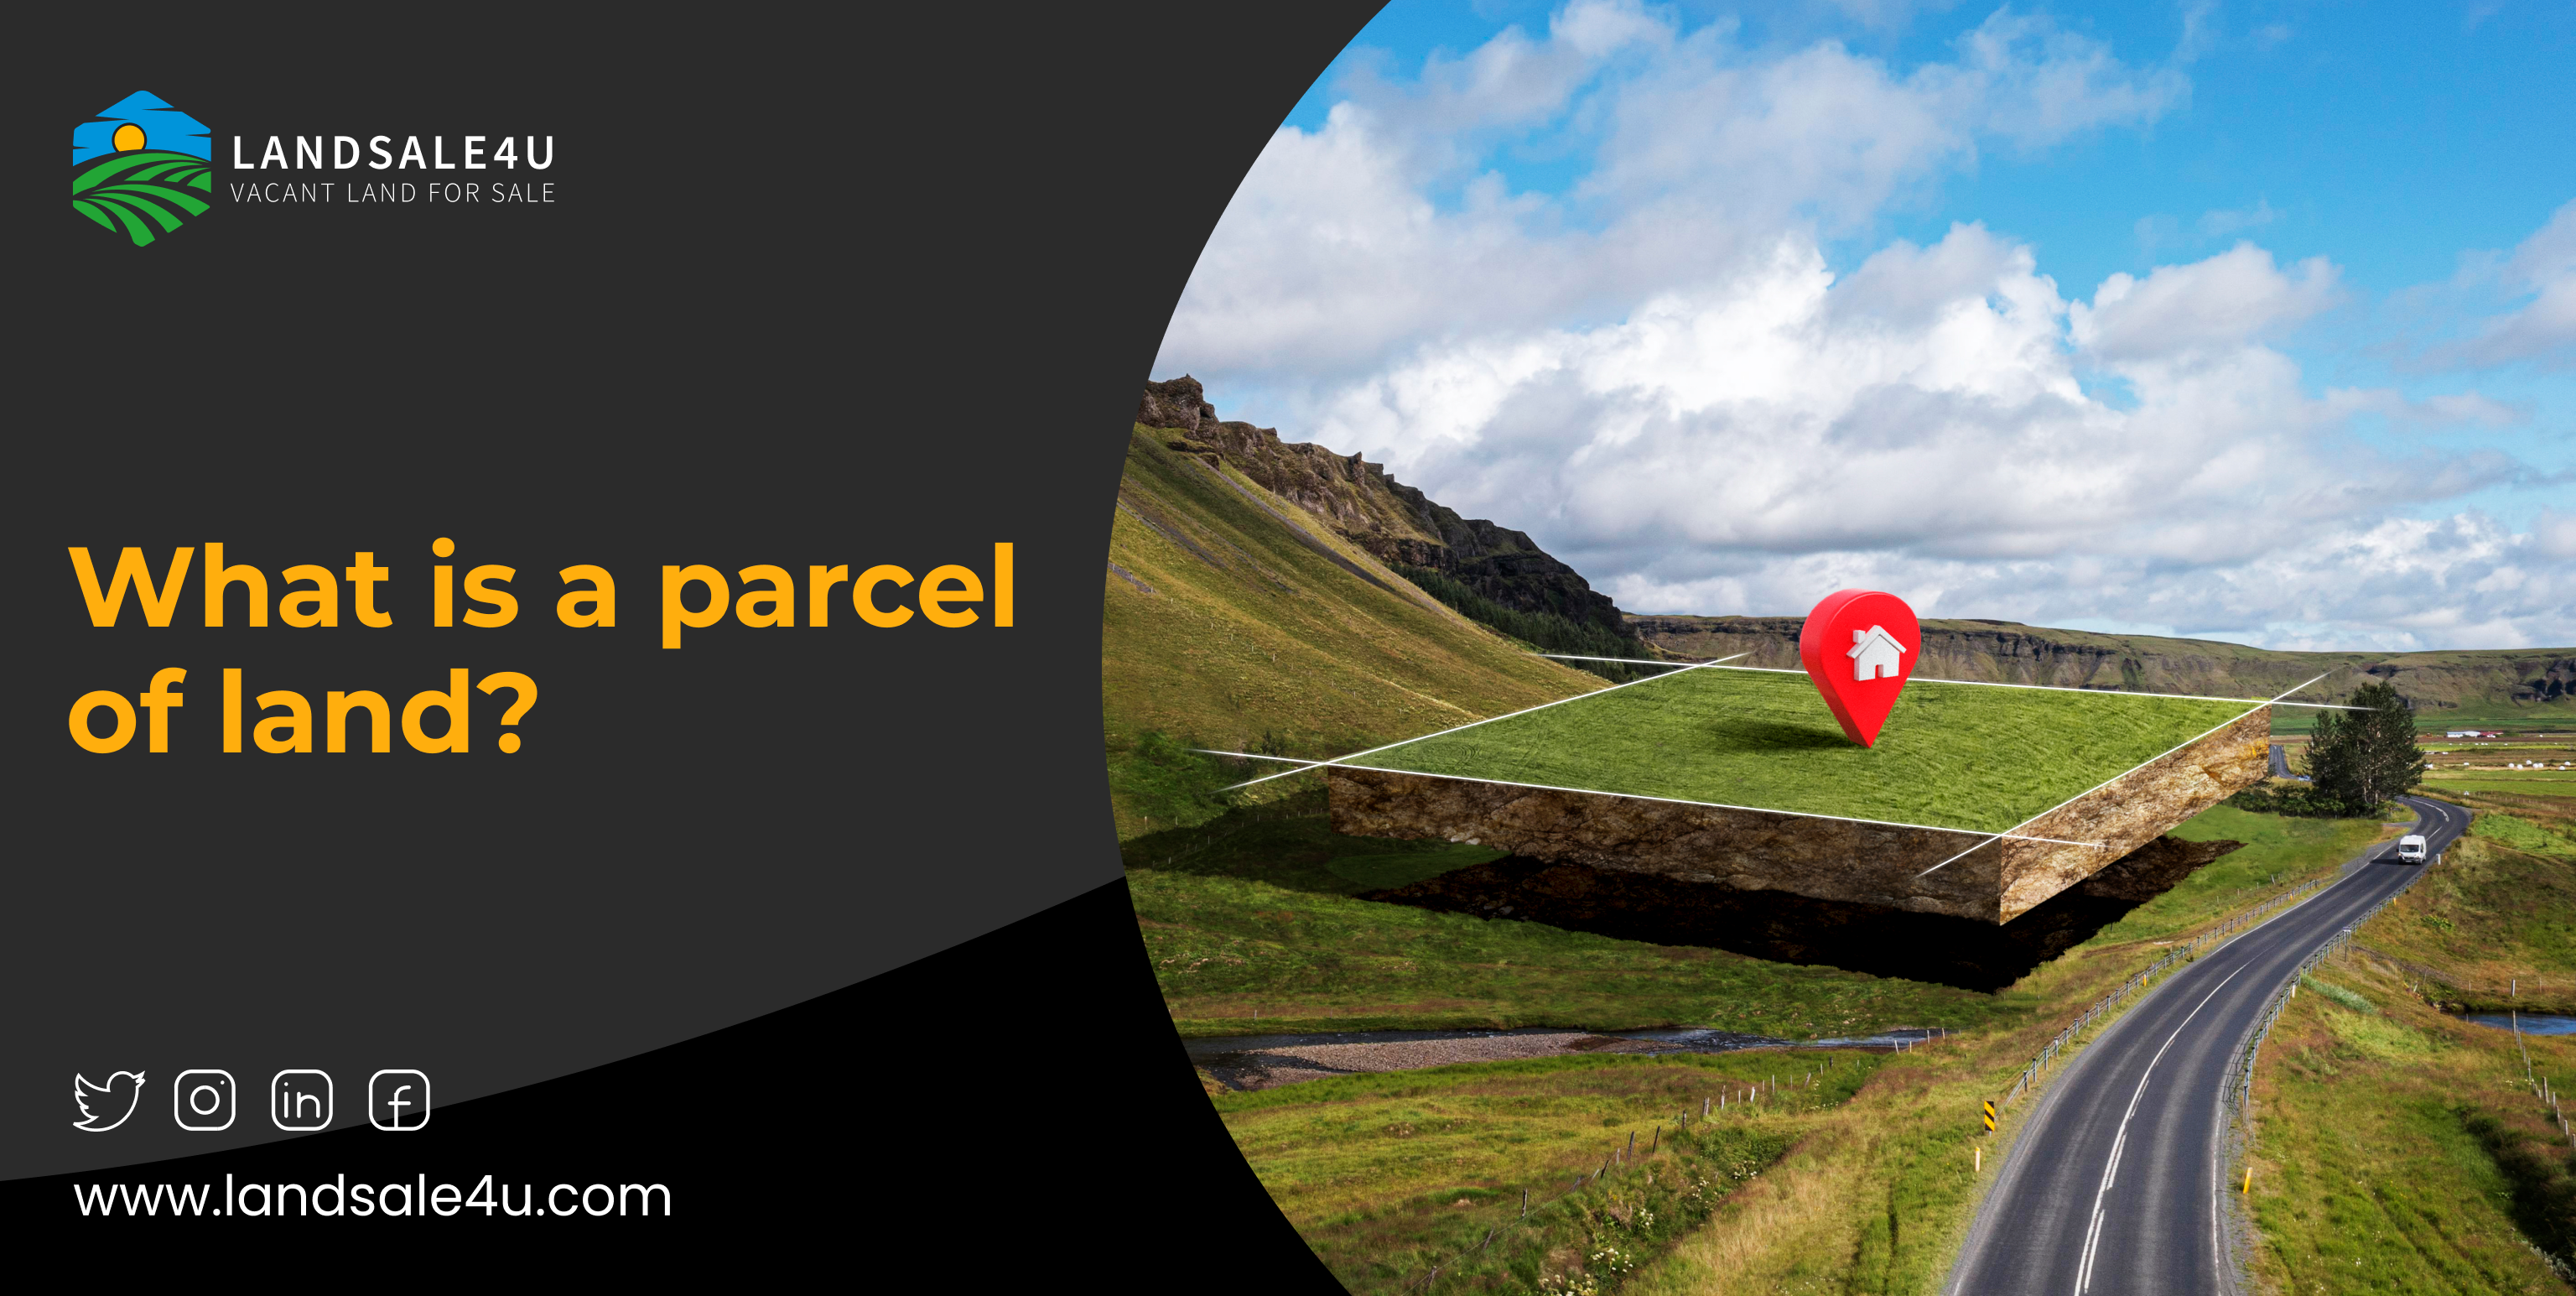 What Is A Parcel of Land